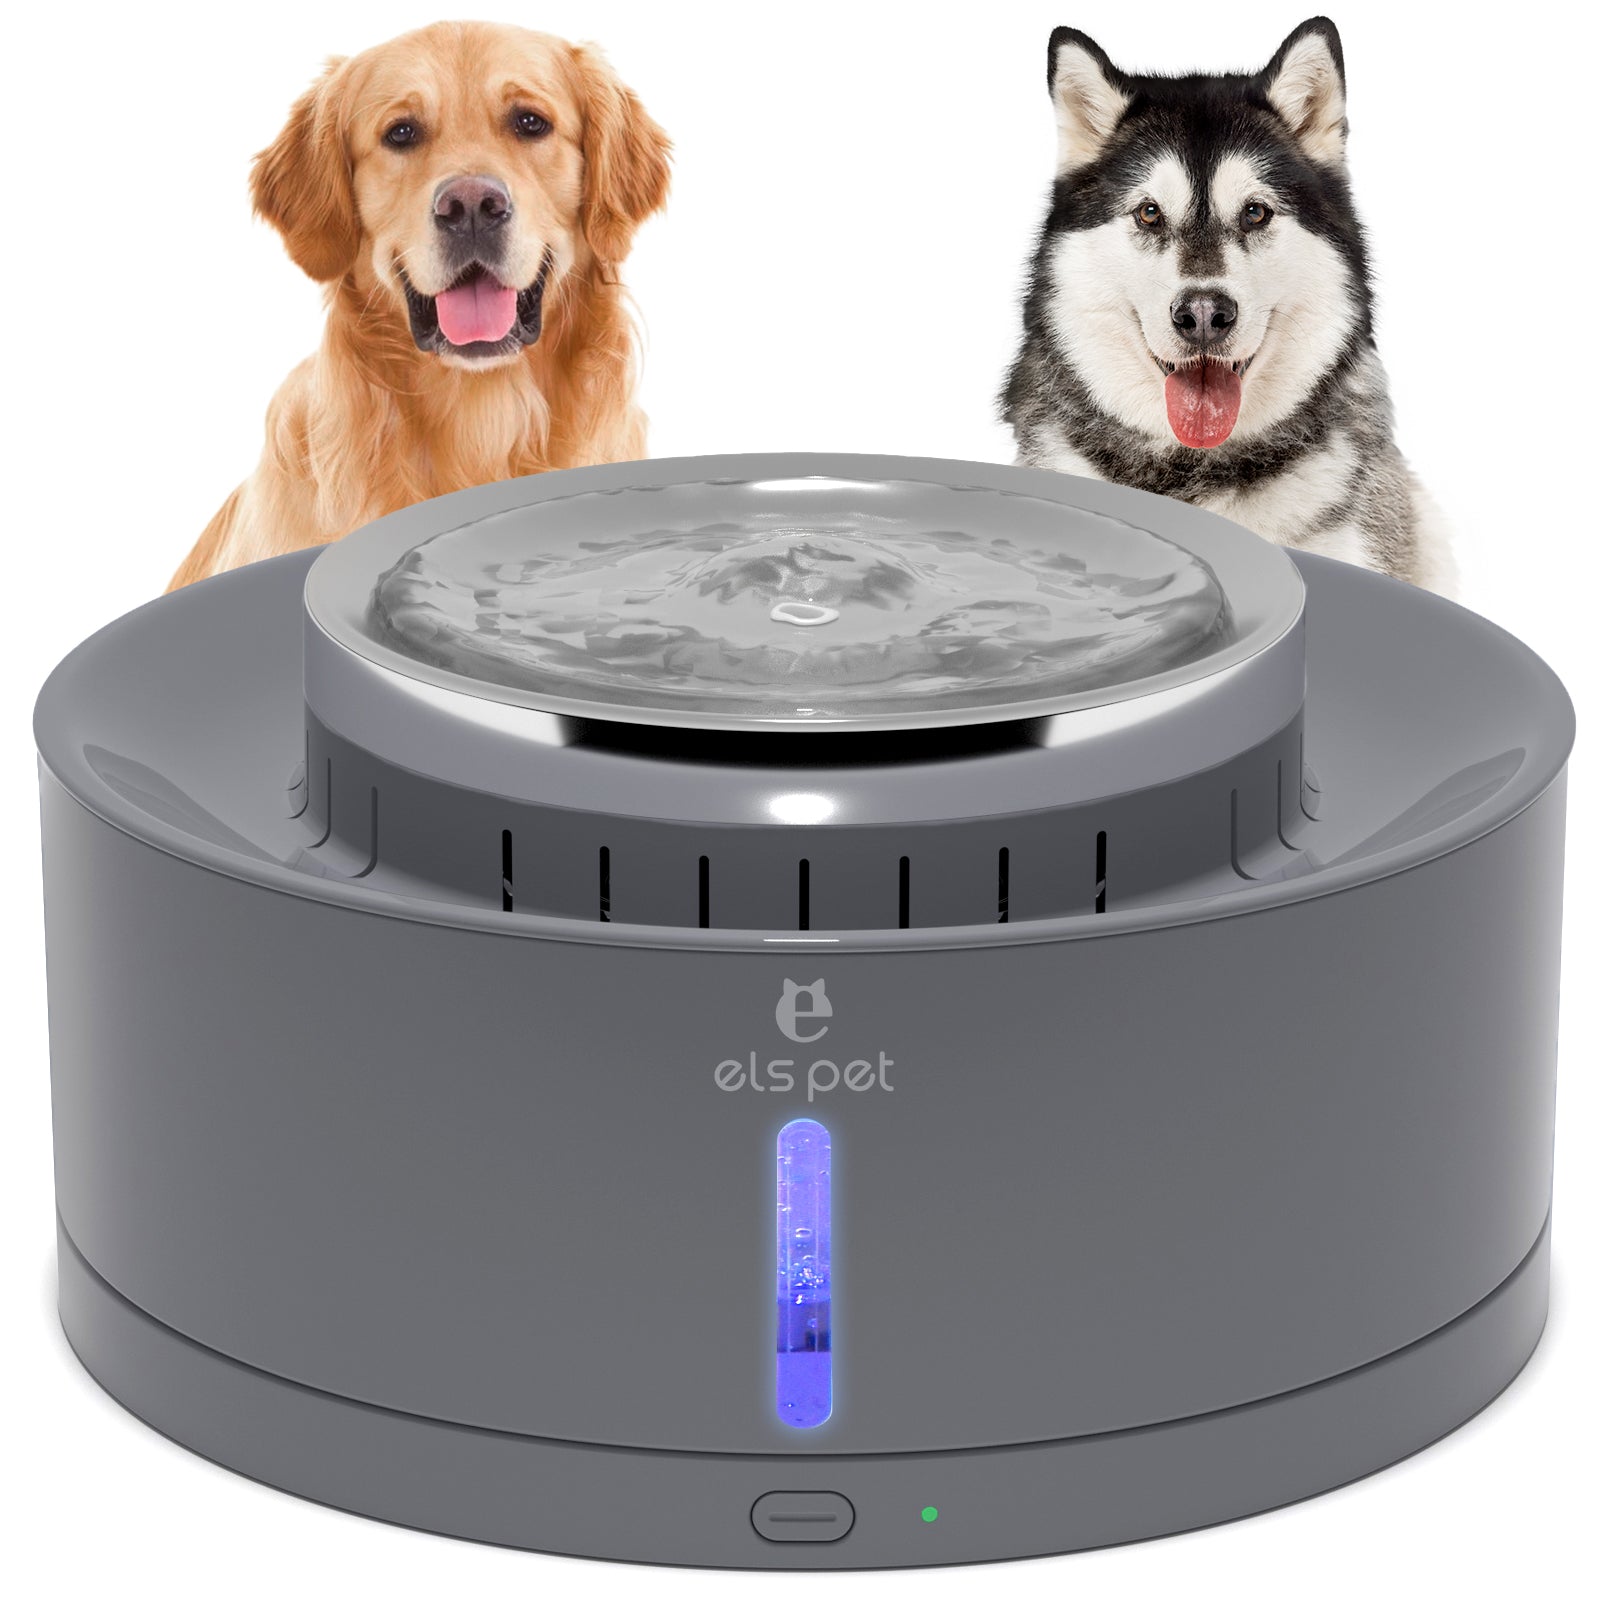 270oz/8L Automatic Dog Water Fountain